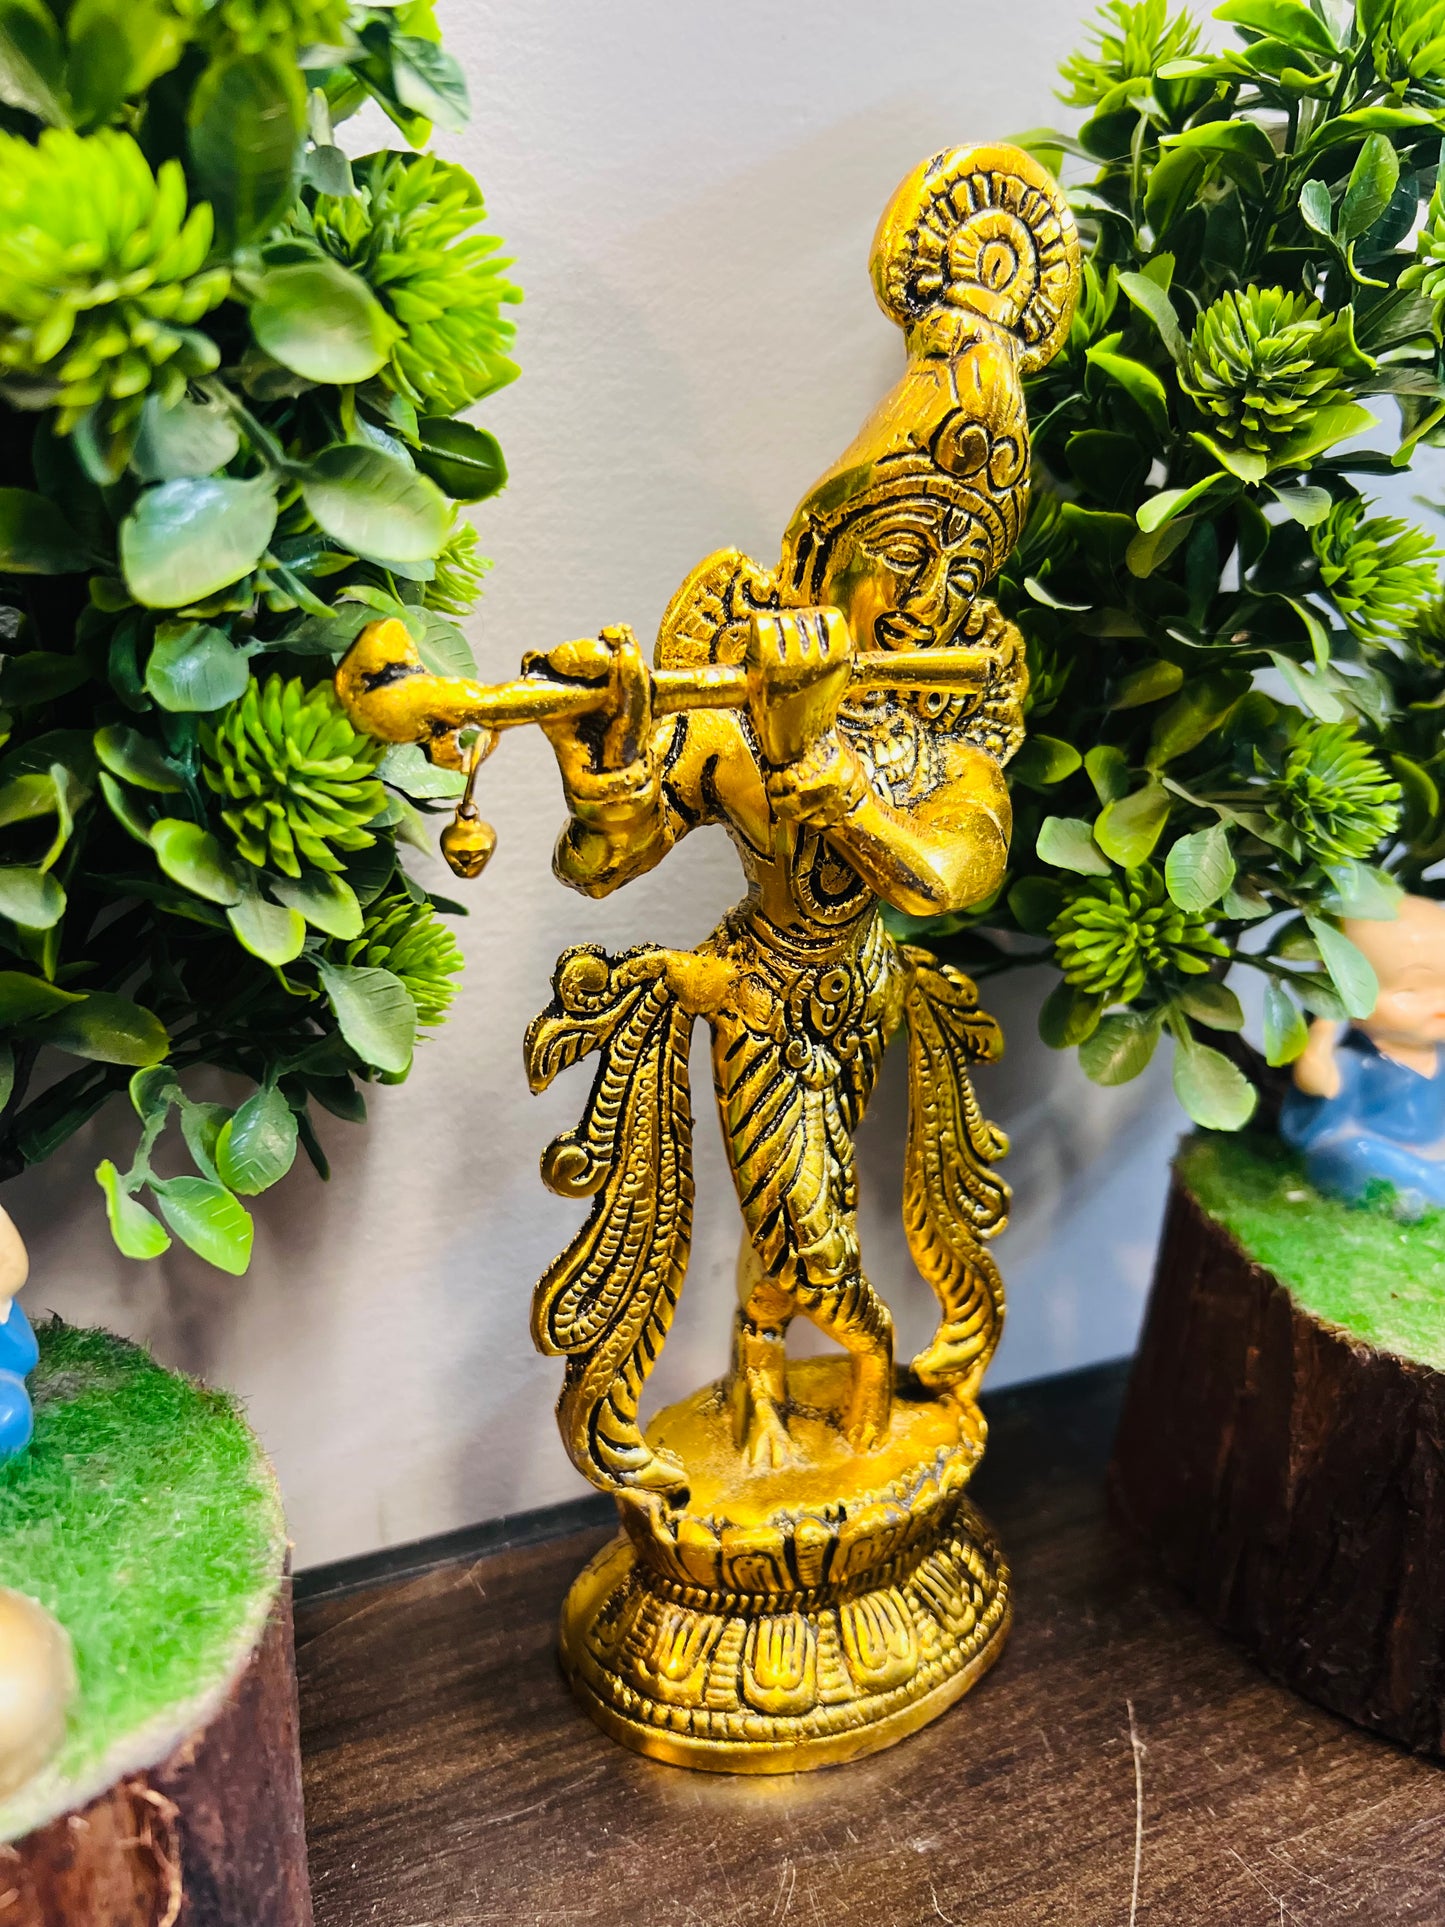 CHANDNI COLLECTION Lord Krishna Metal Statue,Krishna Murti Playing Flute for Temple Pooja,Decor Your Home,Office & Gift Your Relatives,Showpiece Figurines,Religious Idol,Gift Article.